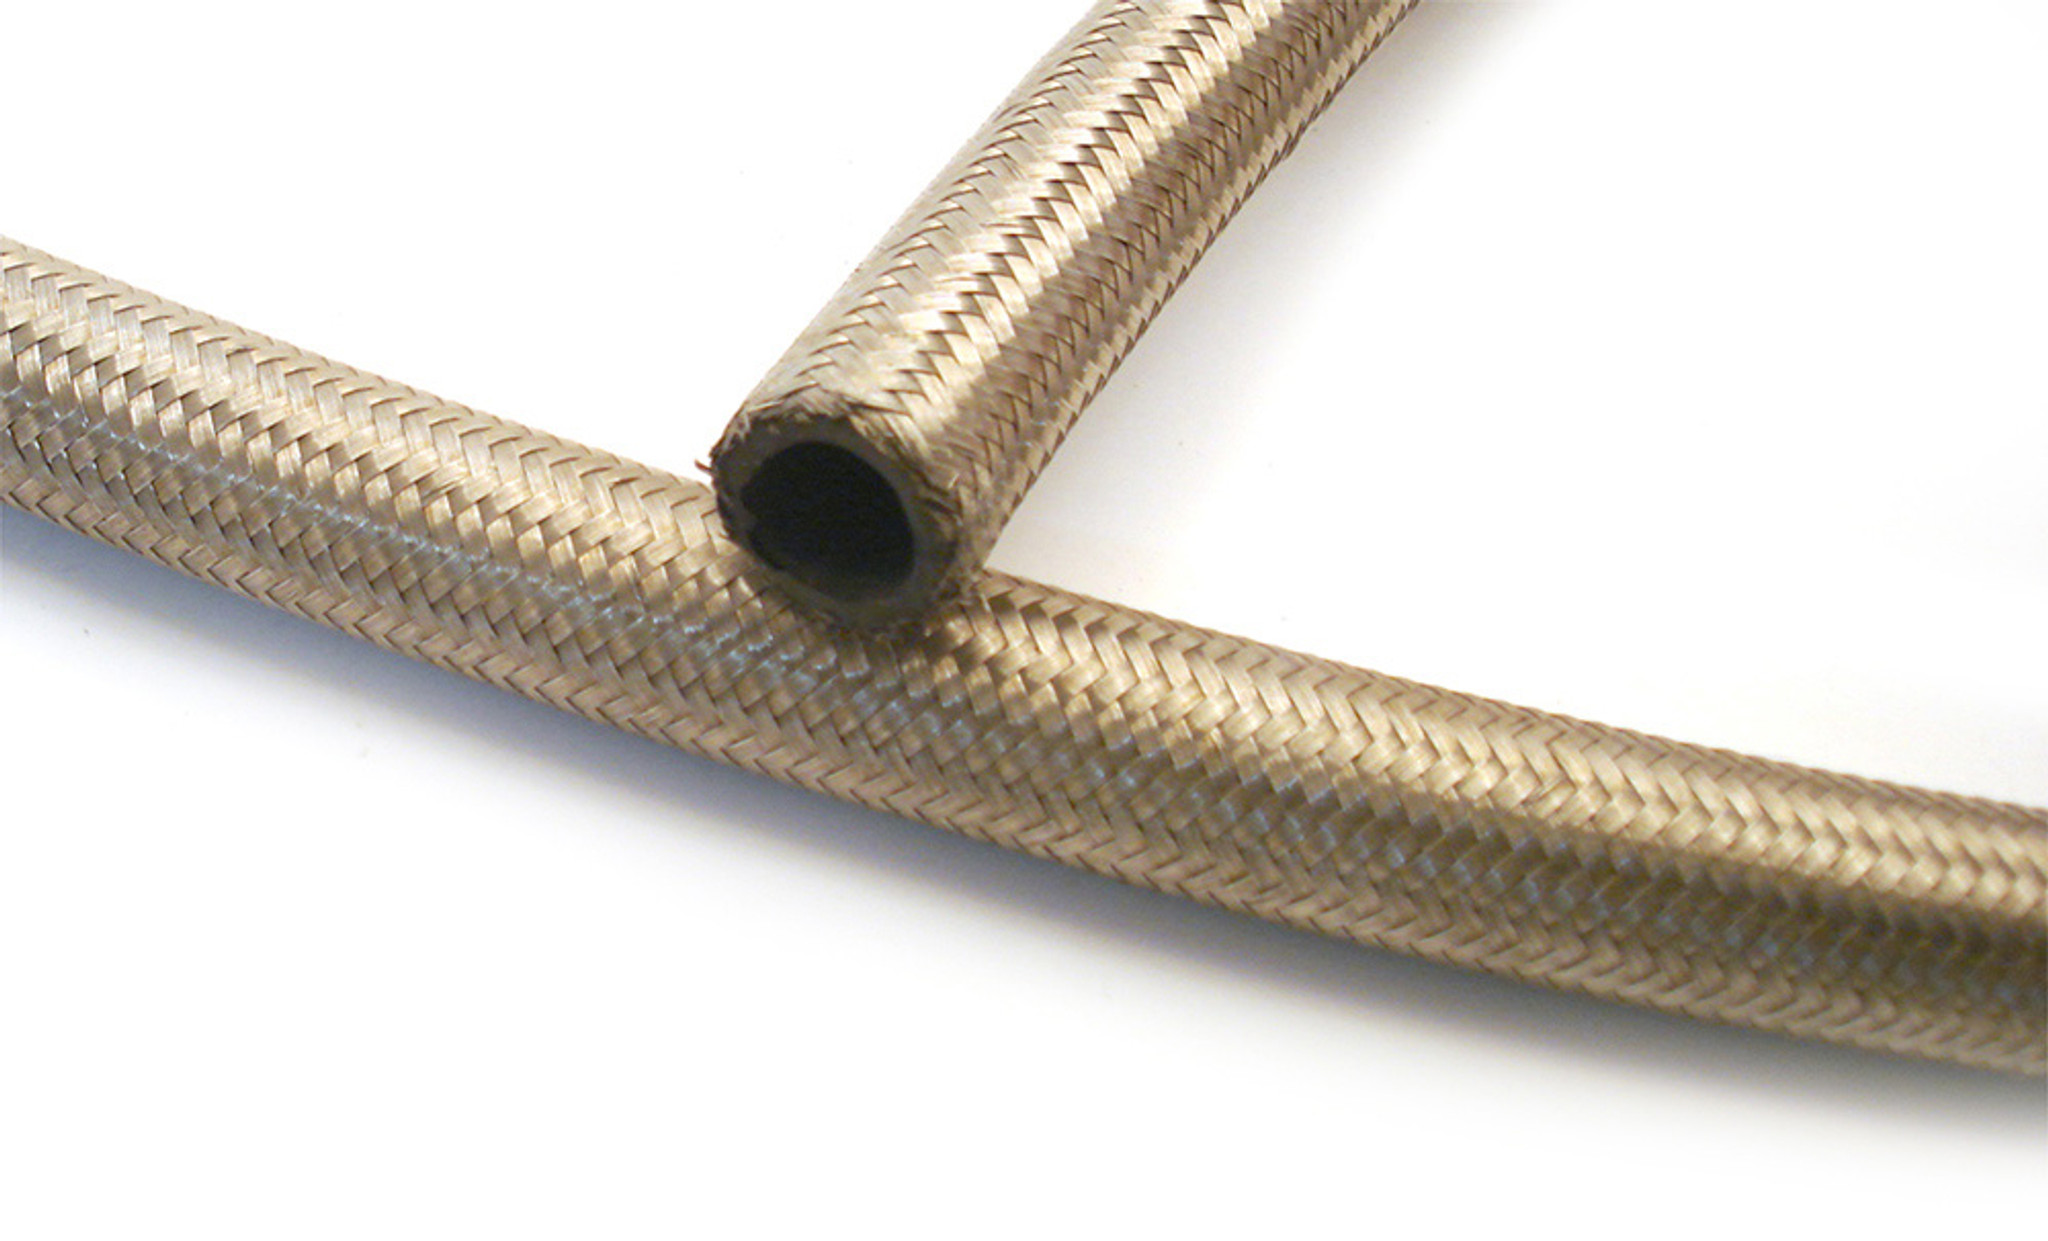 AN6 -6AN Fitting Stainless Steel Nylon Braided Oil Fuel Hose Line